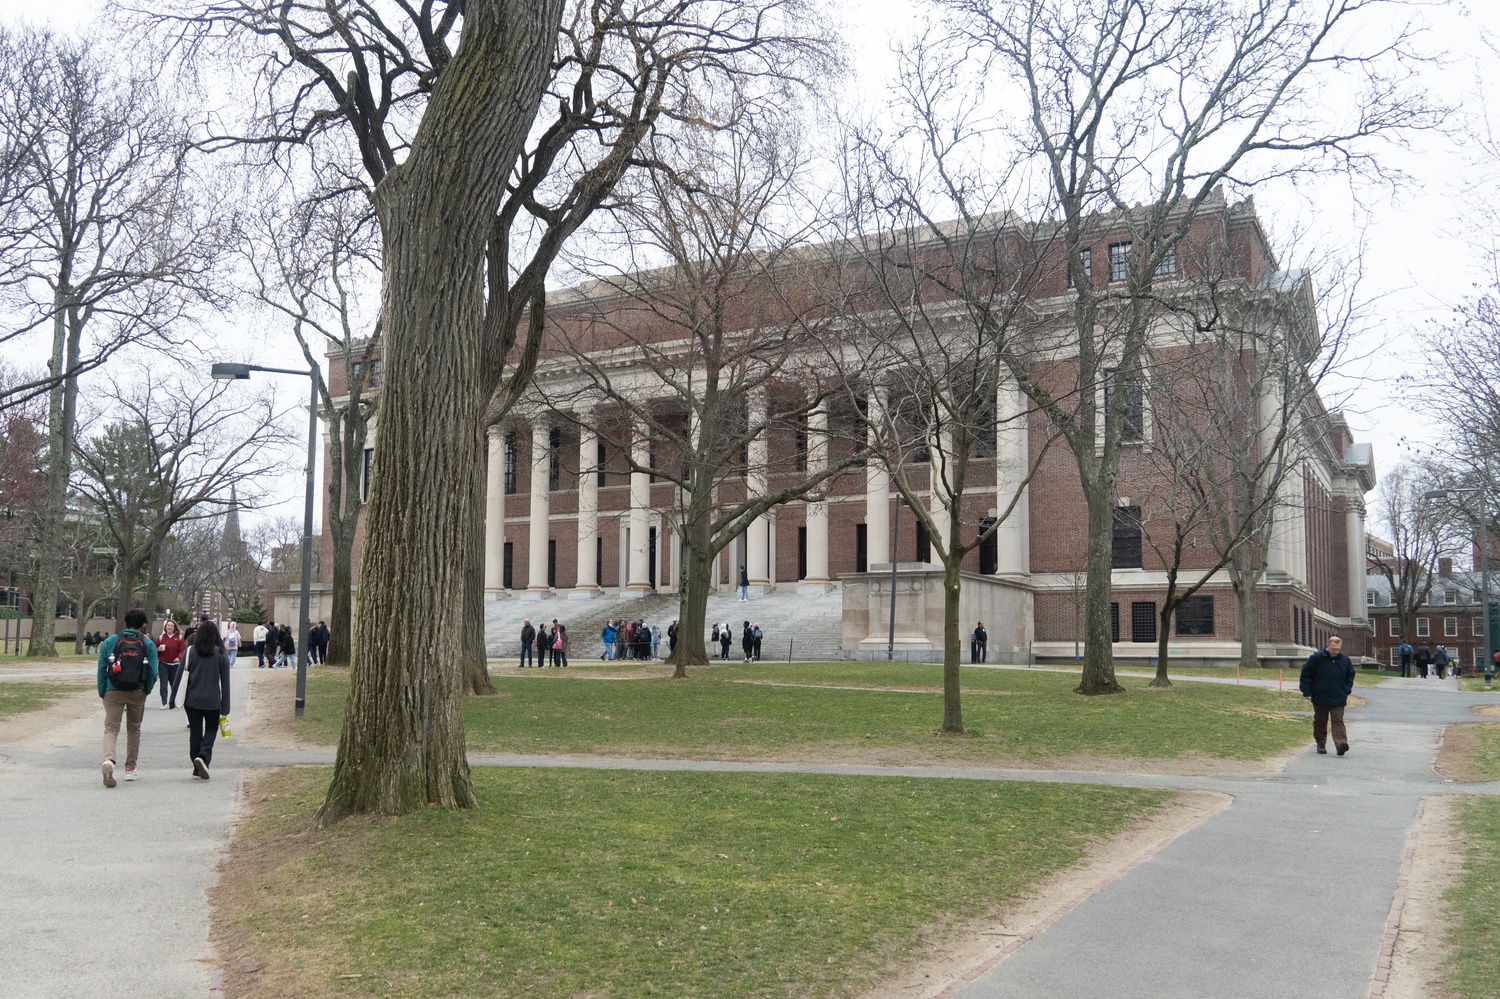 At least five Harvard student groups have withdrawn their signatures from a controversial joint statement that received widespread national backlash.